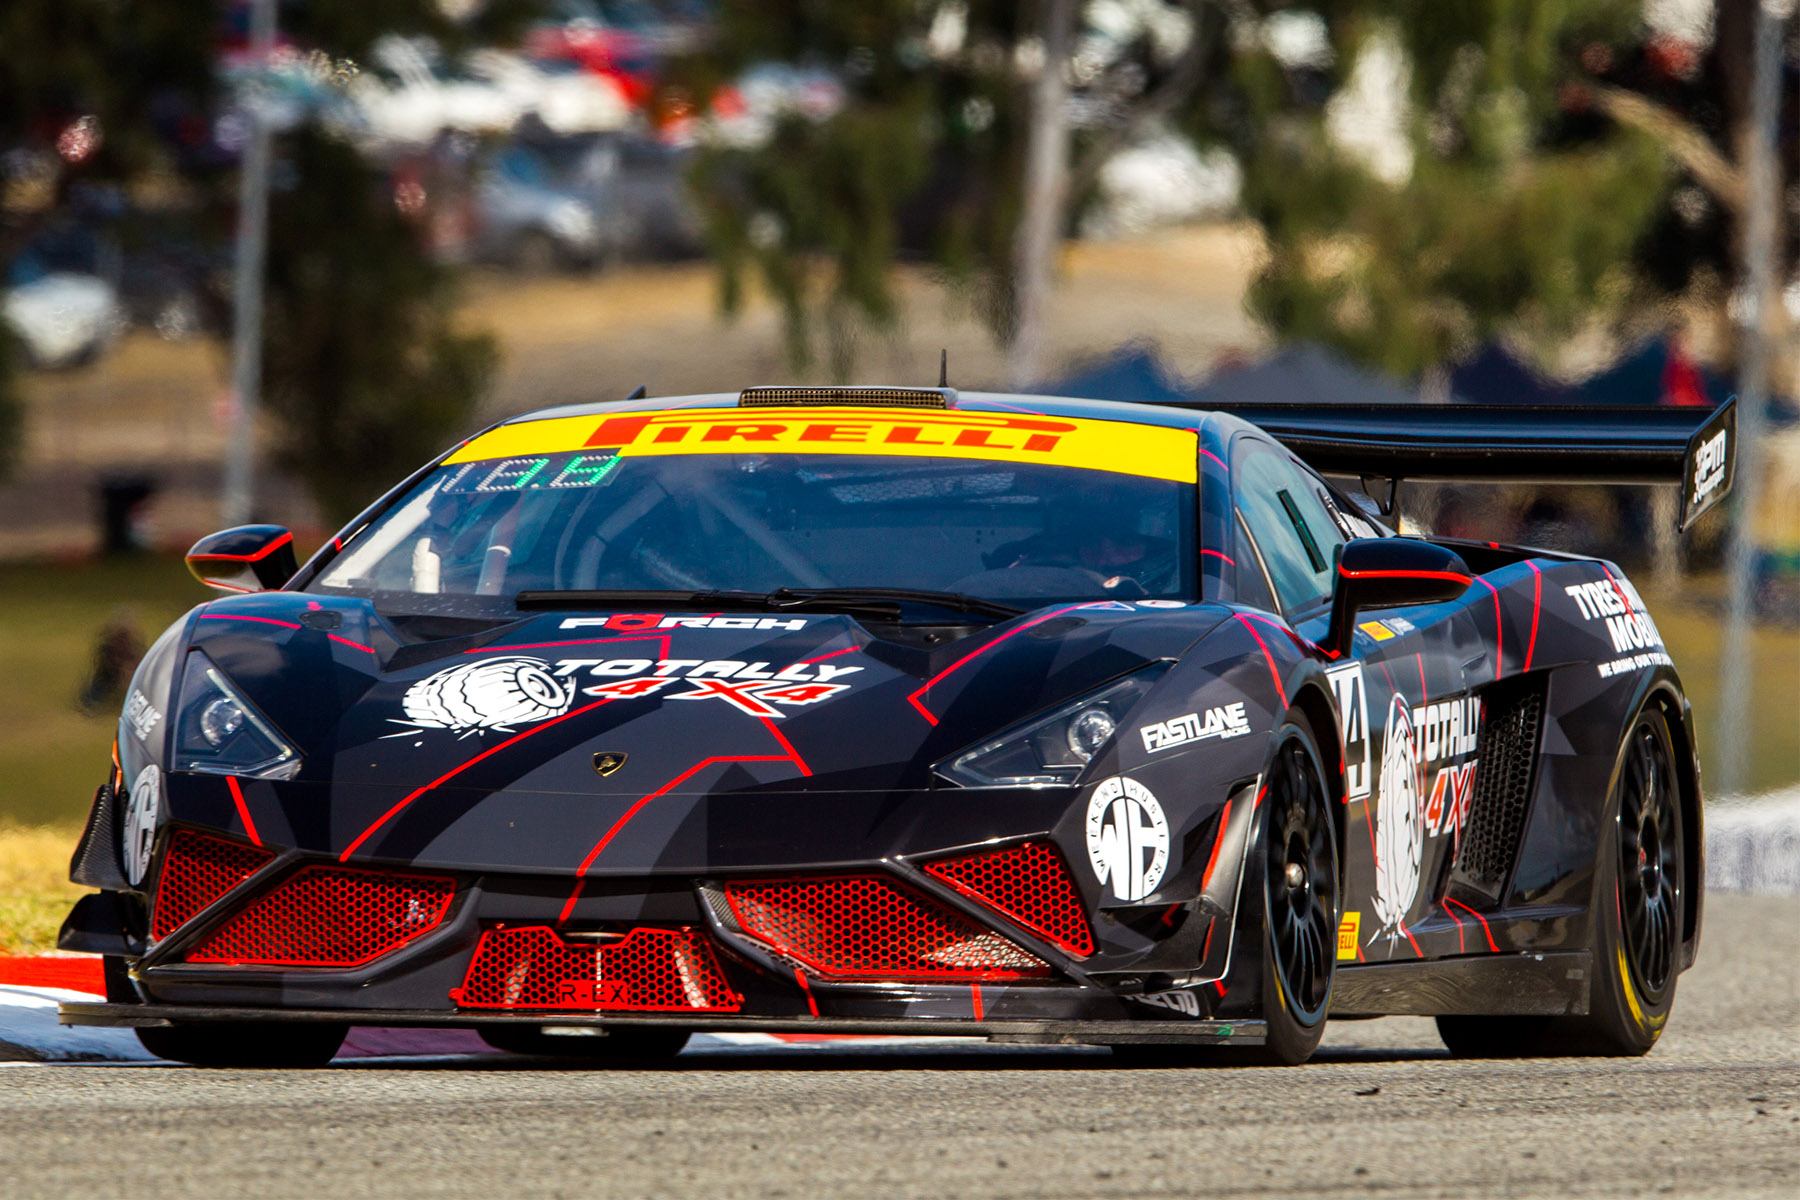 Australian GT heads west for Perth SuperNight day-nighter